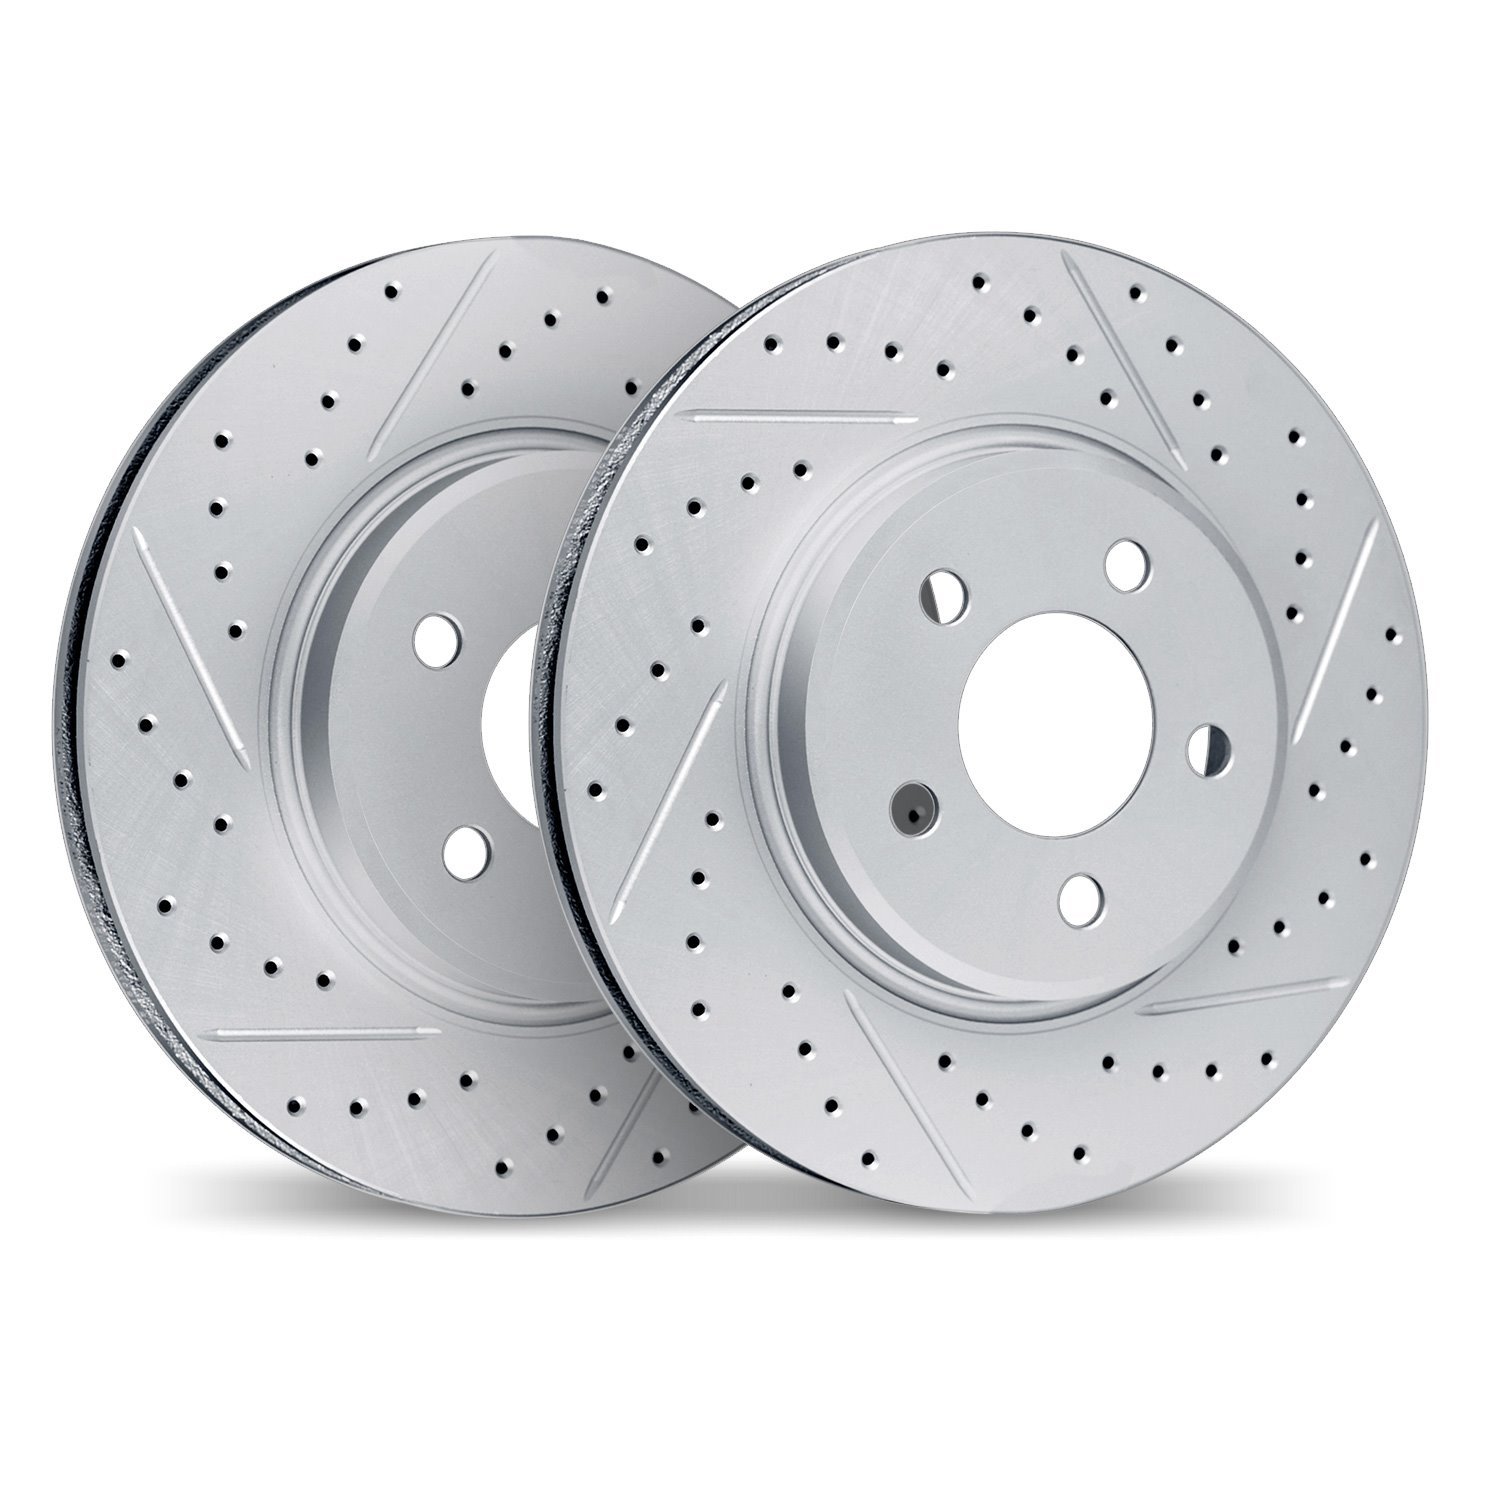 2002-54027 Geoperformance Drilled/Slotted Brake Rotors, 2001-2007 Ford/Lincoln/Mercury/Mazda, Position: Front